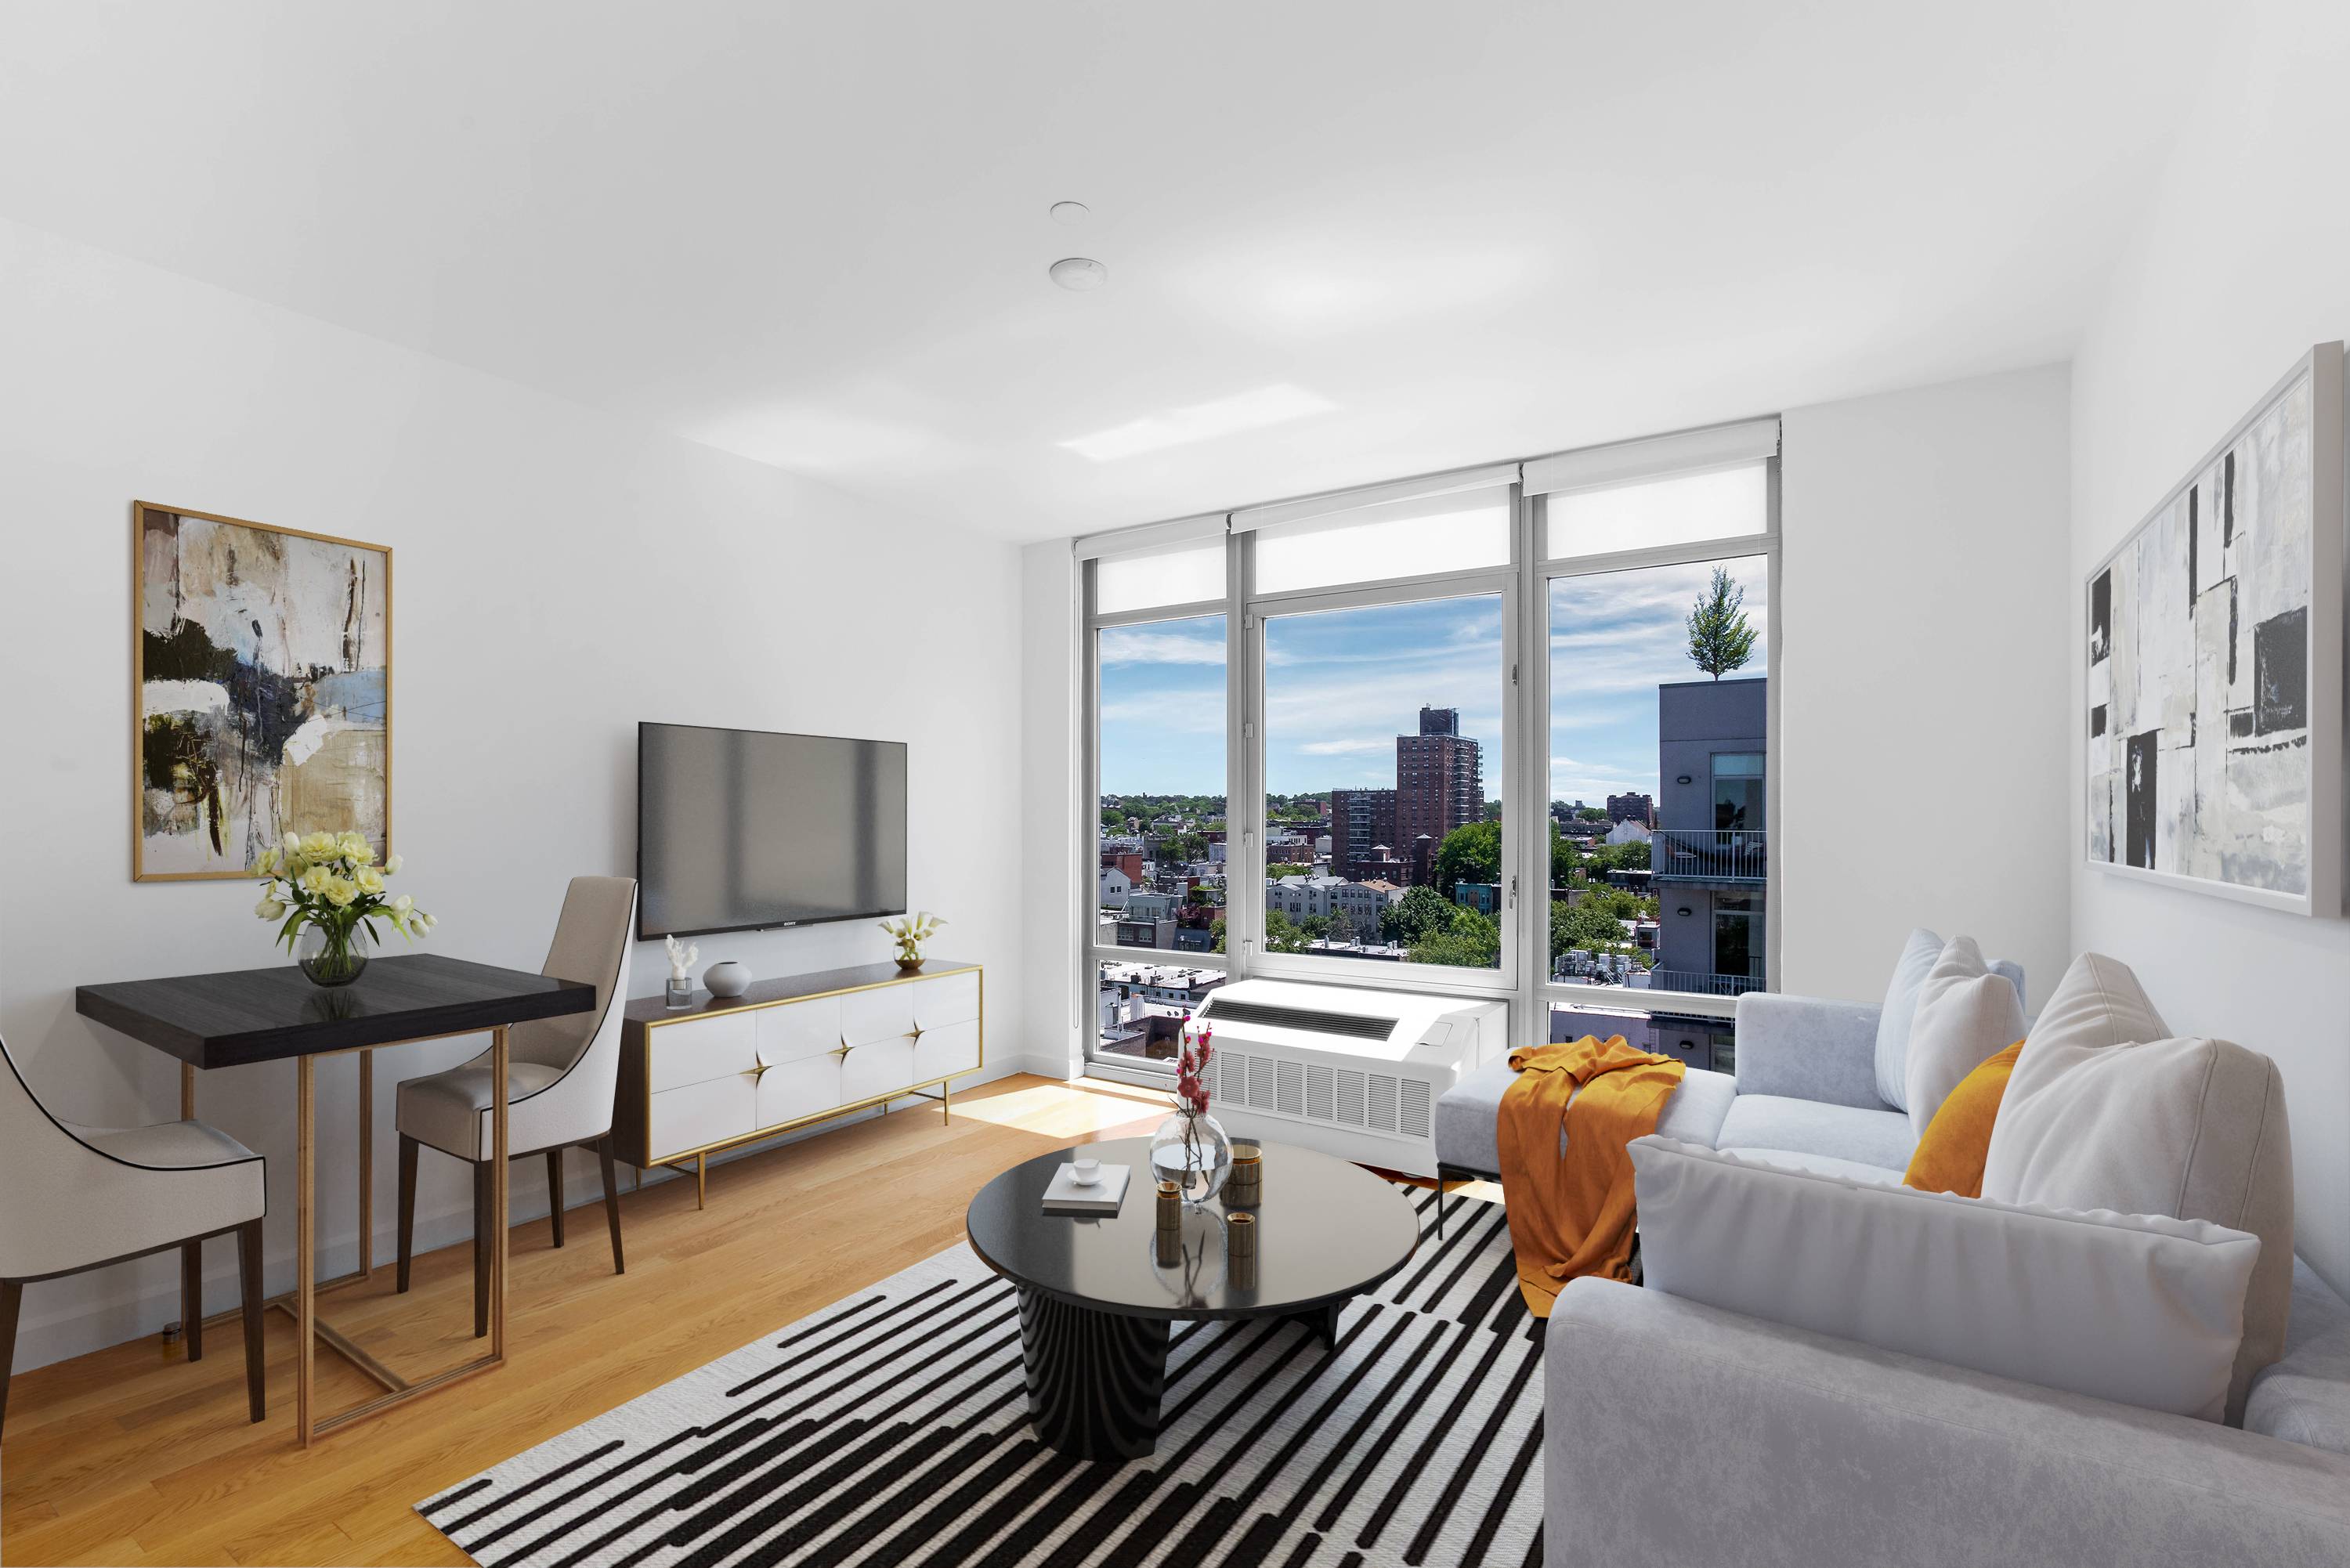 Park Slope The Landmark Large 1BD with Floor To Ceiling Windows with Gourmet Kitchen with Stainless Steel Appliances, Washer Dryer in Unit all in a Luxury Doorman Building with Roof ...